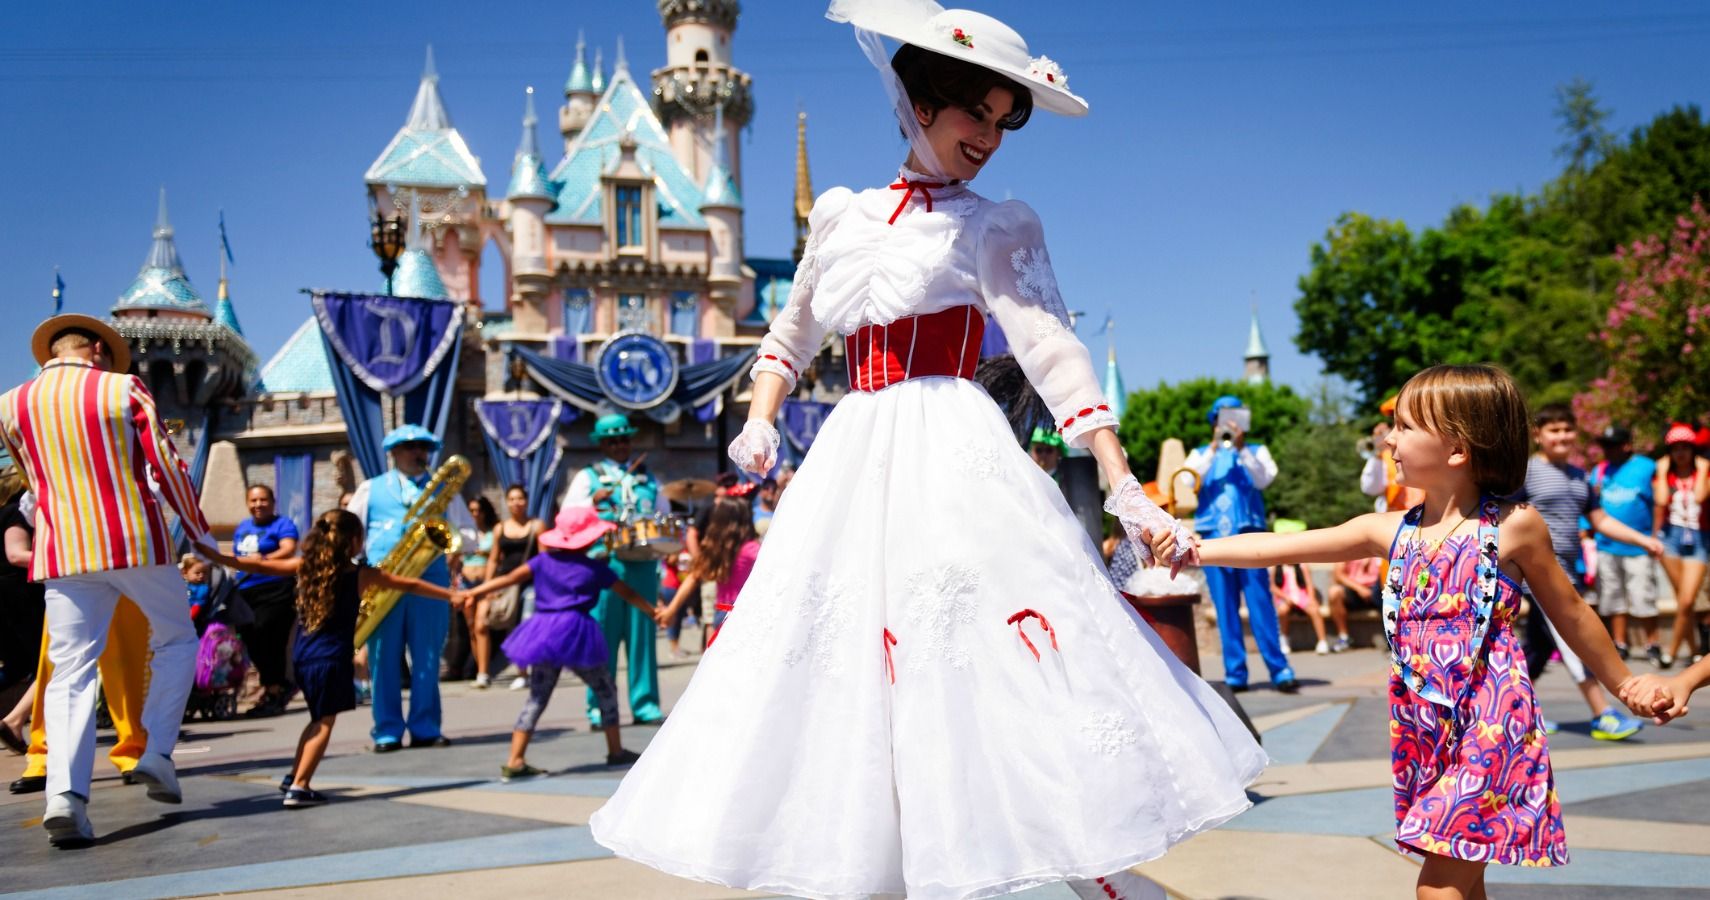 Disneyland Will Sell Alcohol For The First Time In Its 63-Year History